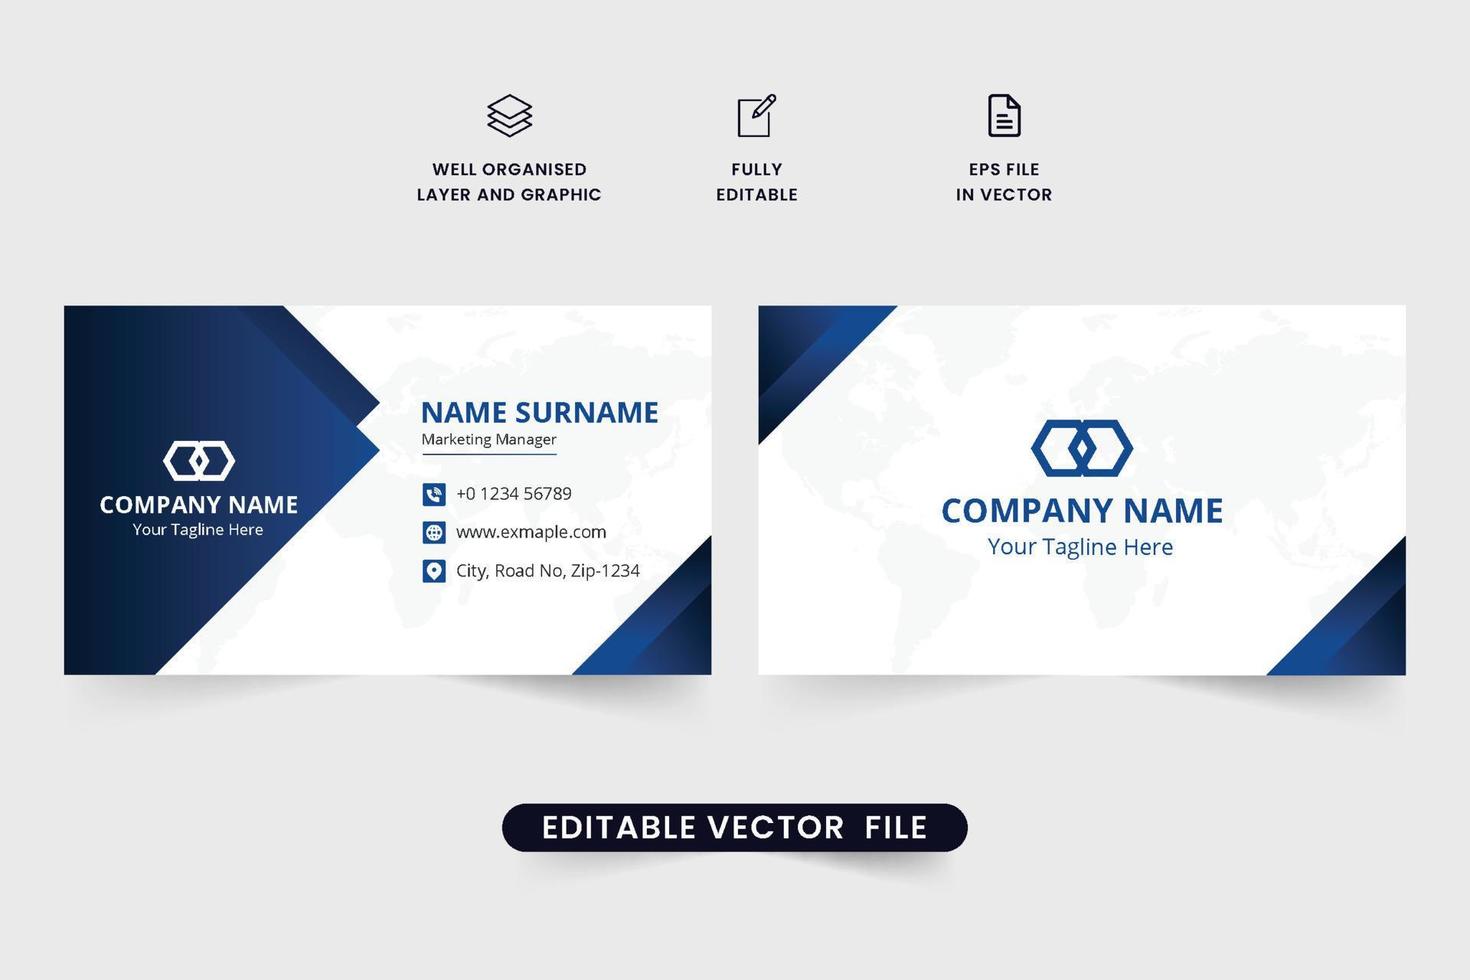 Futuristic business card design with dark blue color. Modern business branding identity card vector with geometric shapes. Creative printable visiting card design for personal uses.